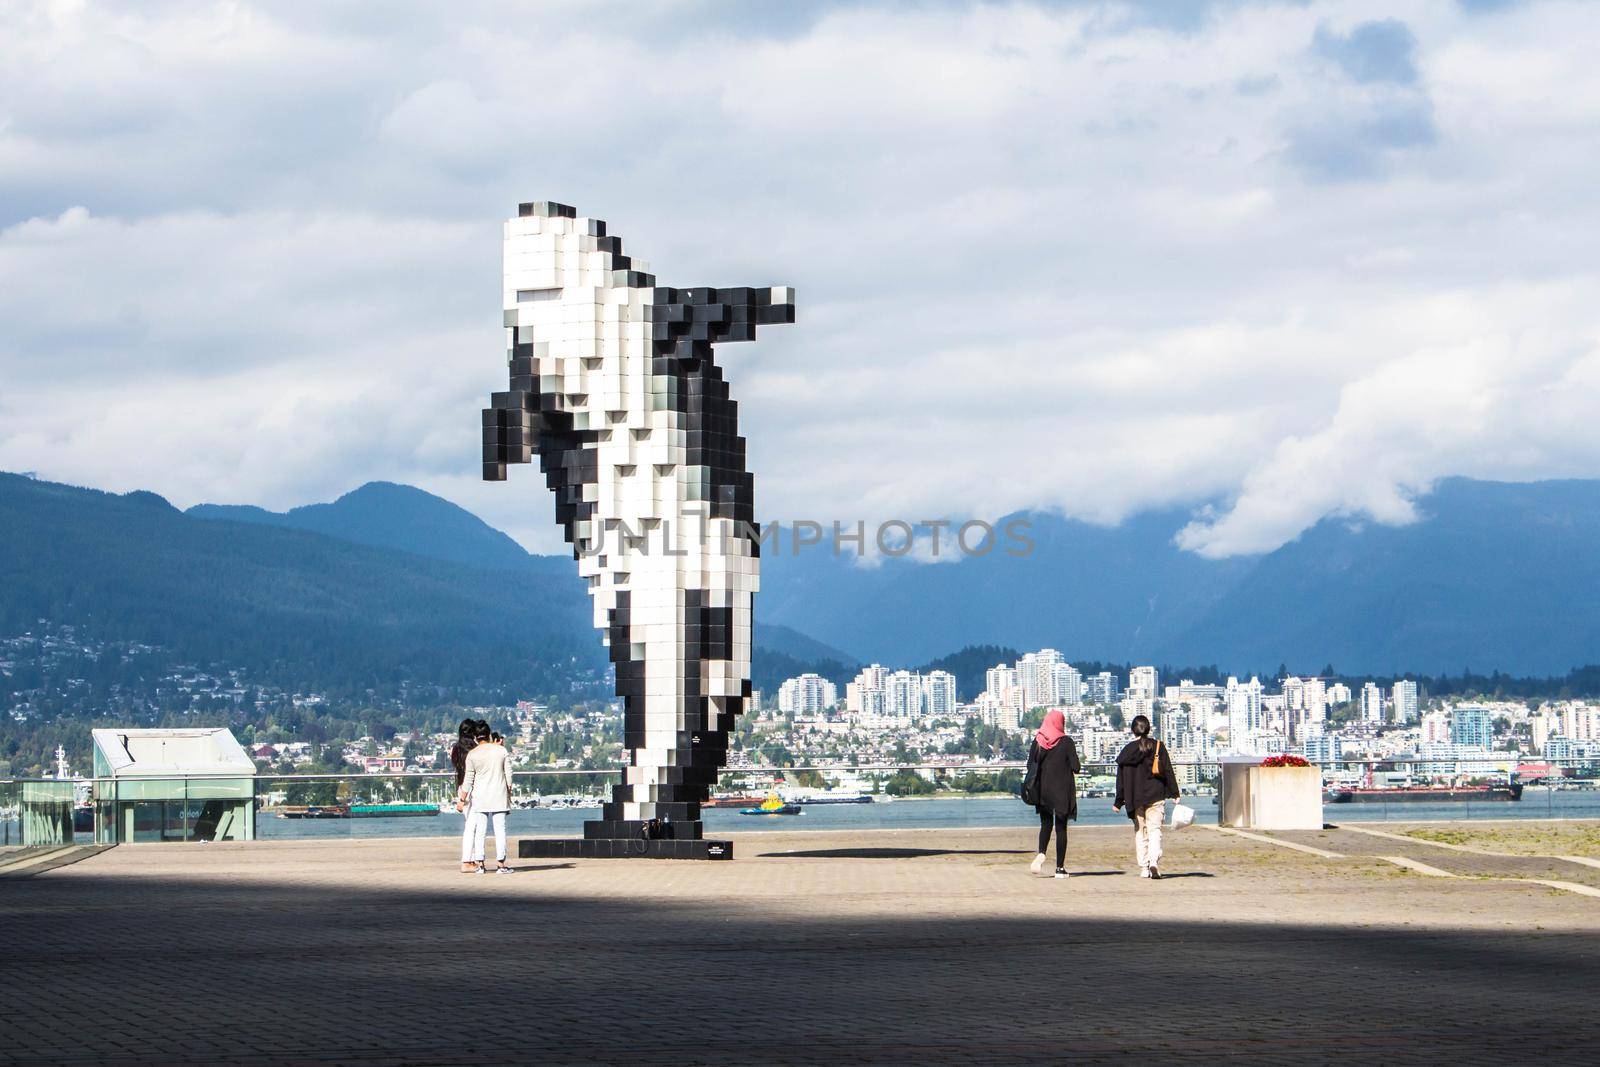 Vancouver, British Columbia, Canada September 2, 2020 . The aluminium sculpture Digital Orca of a Orca whale by the artist Douglas Coupland, installed next to Convention Centre in Vancouver. by JuliaDorian